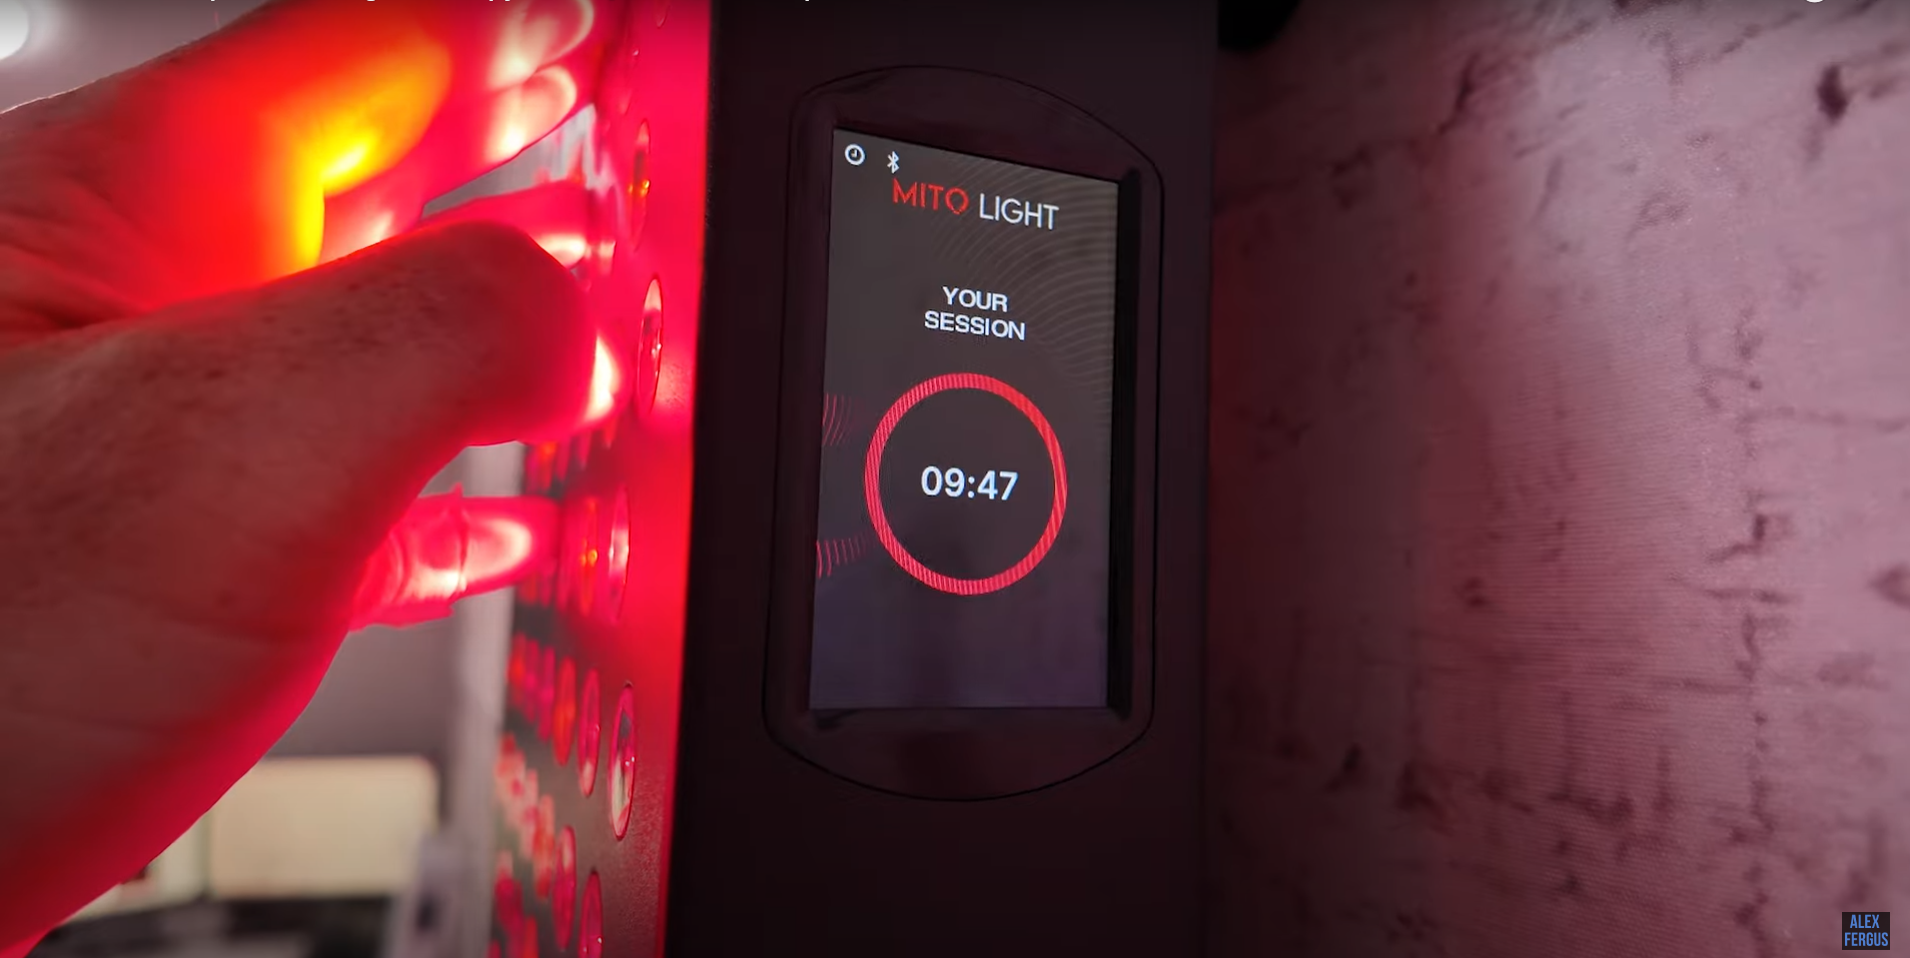 Europe's Best Red Light Therapy Panel [Review & Comparison]!